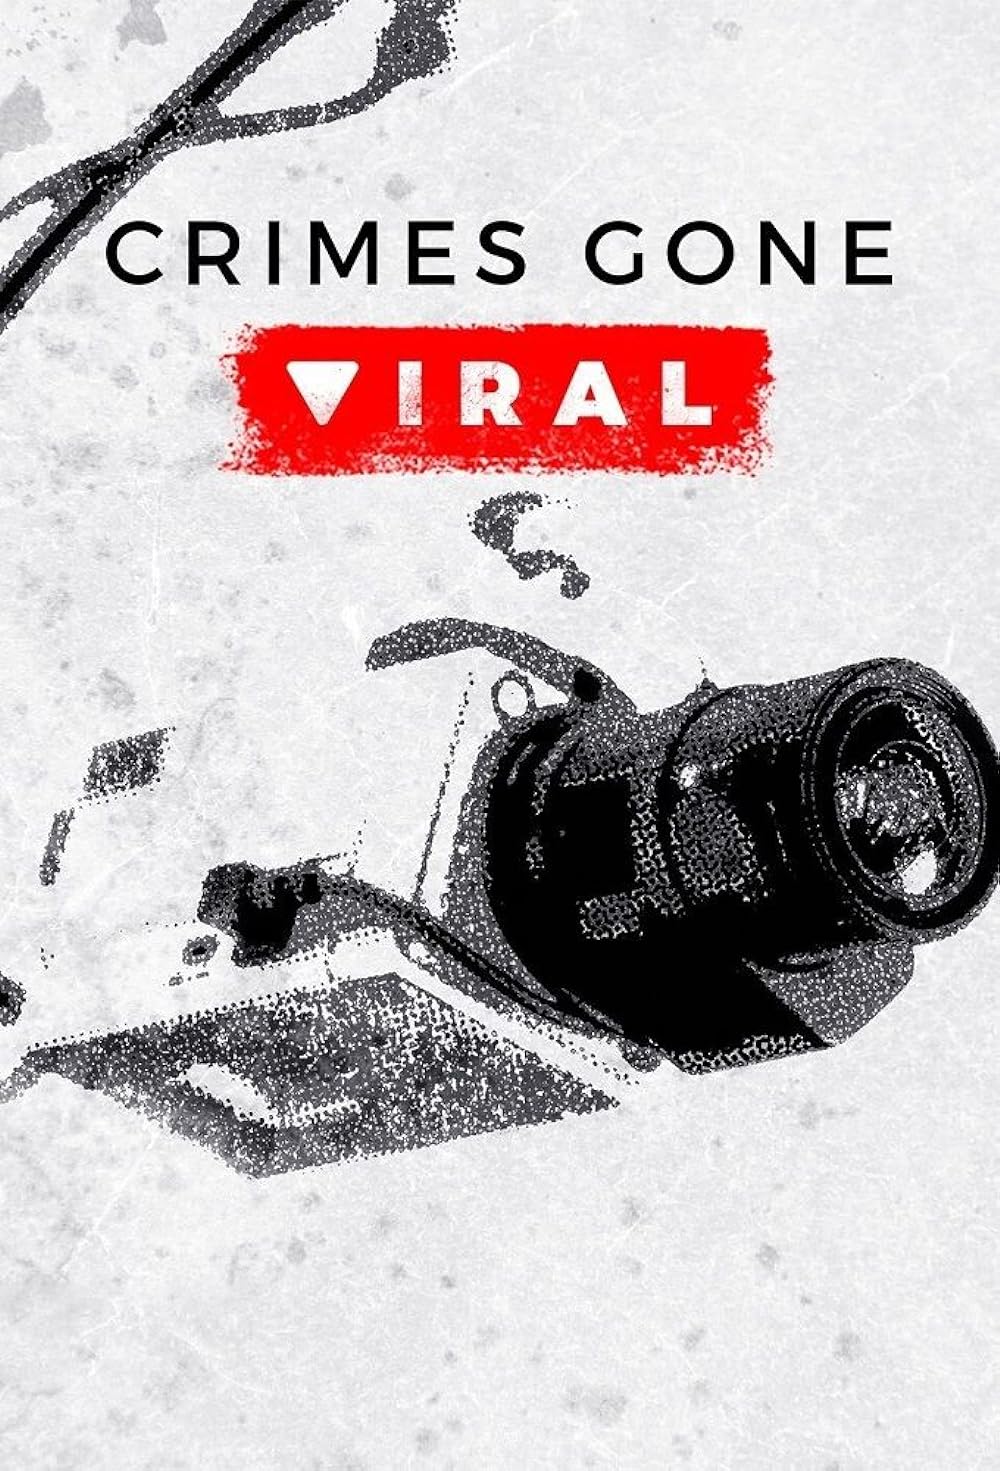 Gone Viral download the last version for android